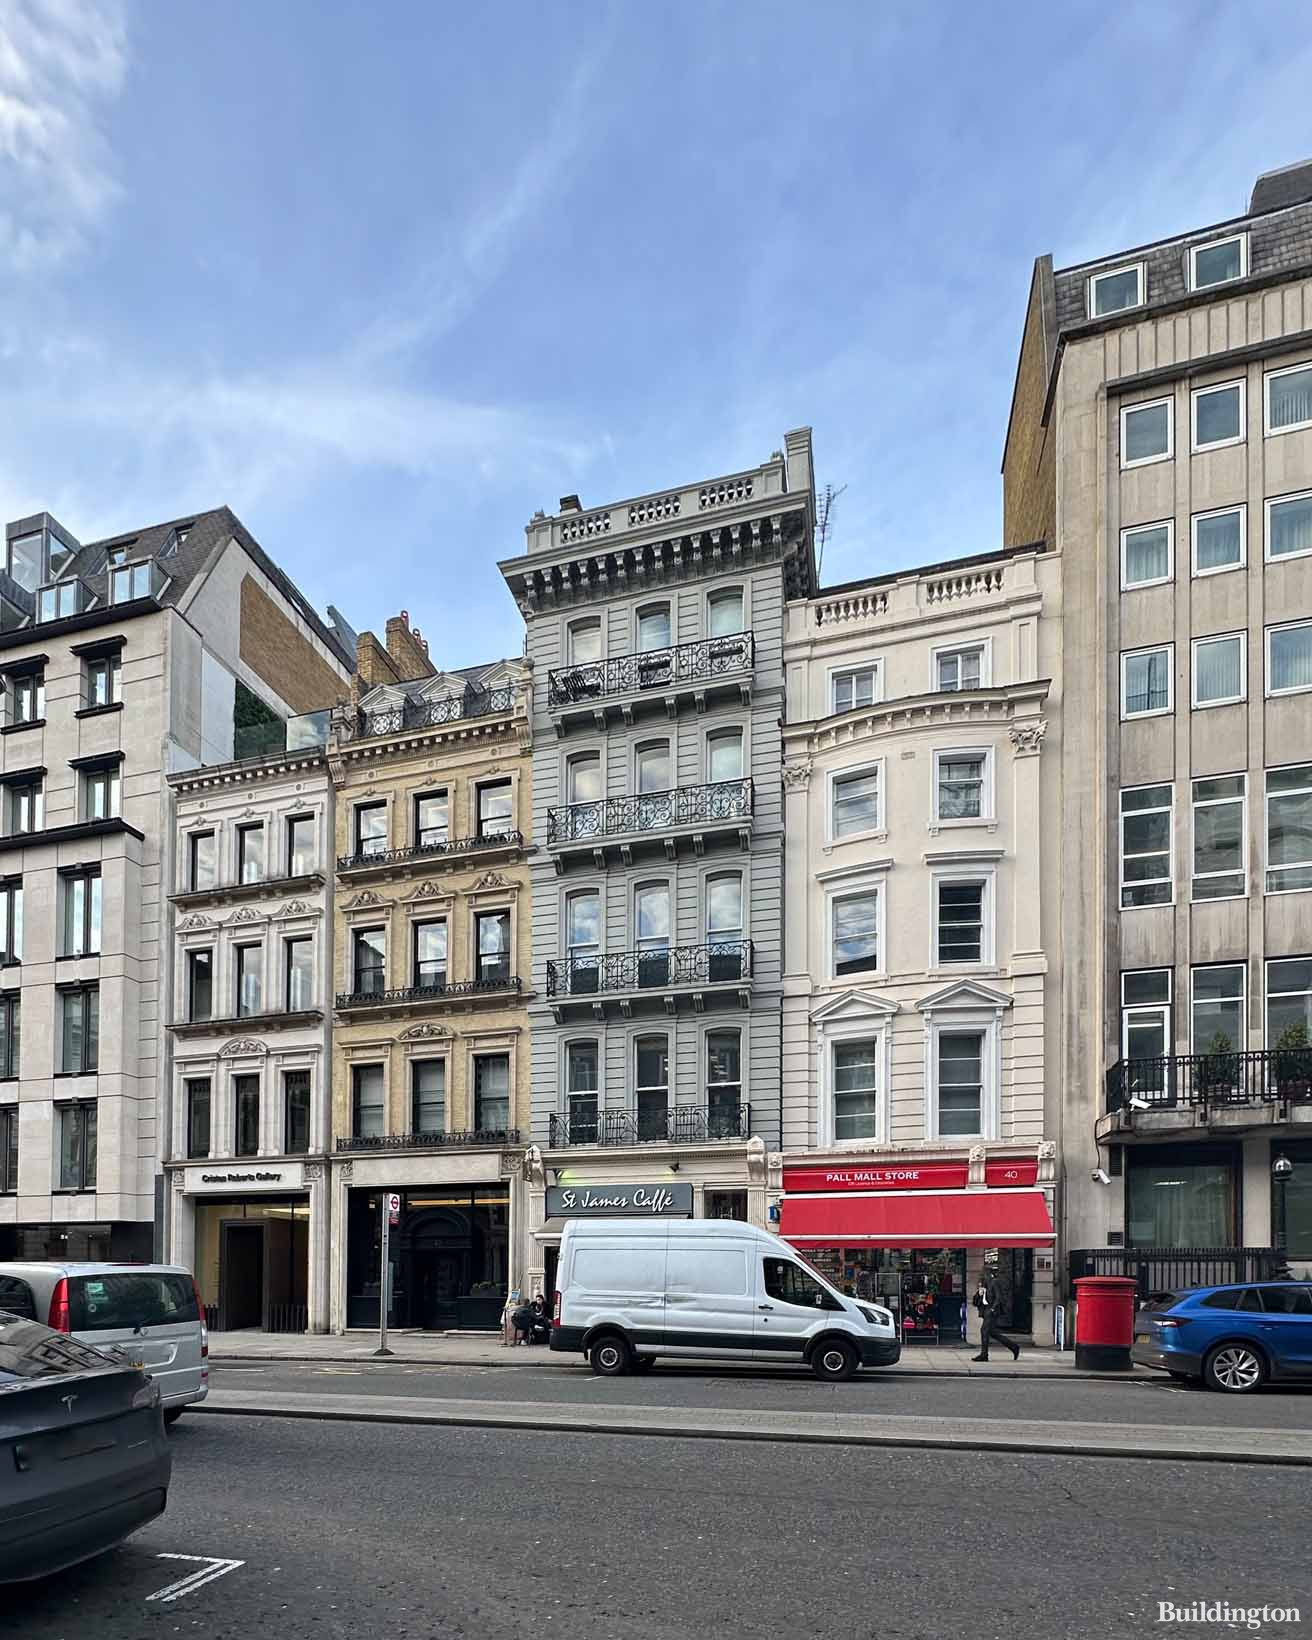 From right second and third building - 40-41 Pall Mall commercial building in Mayfair, London SW1.